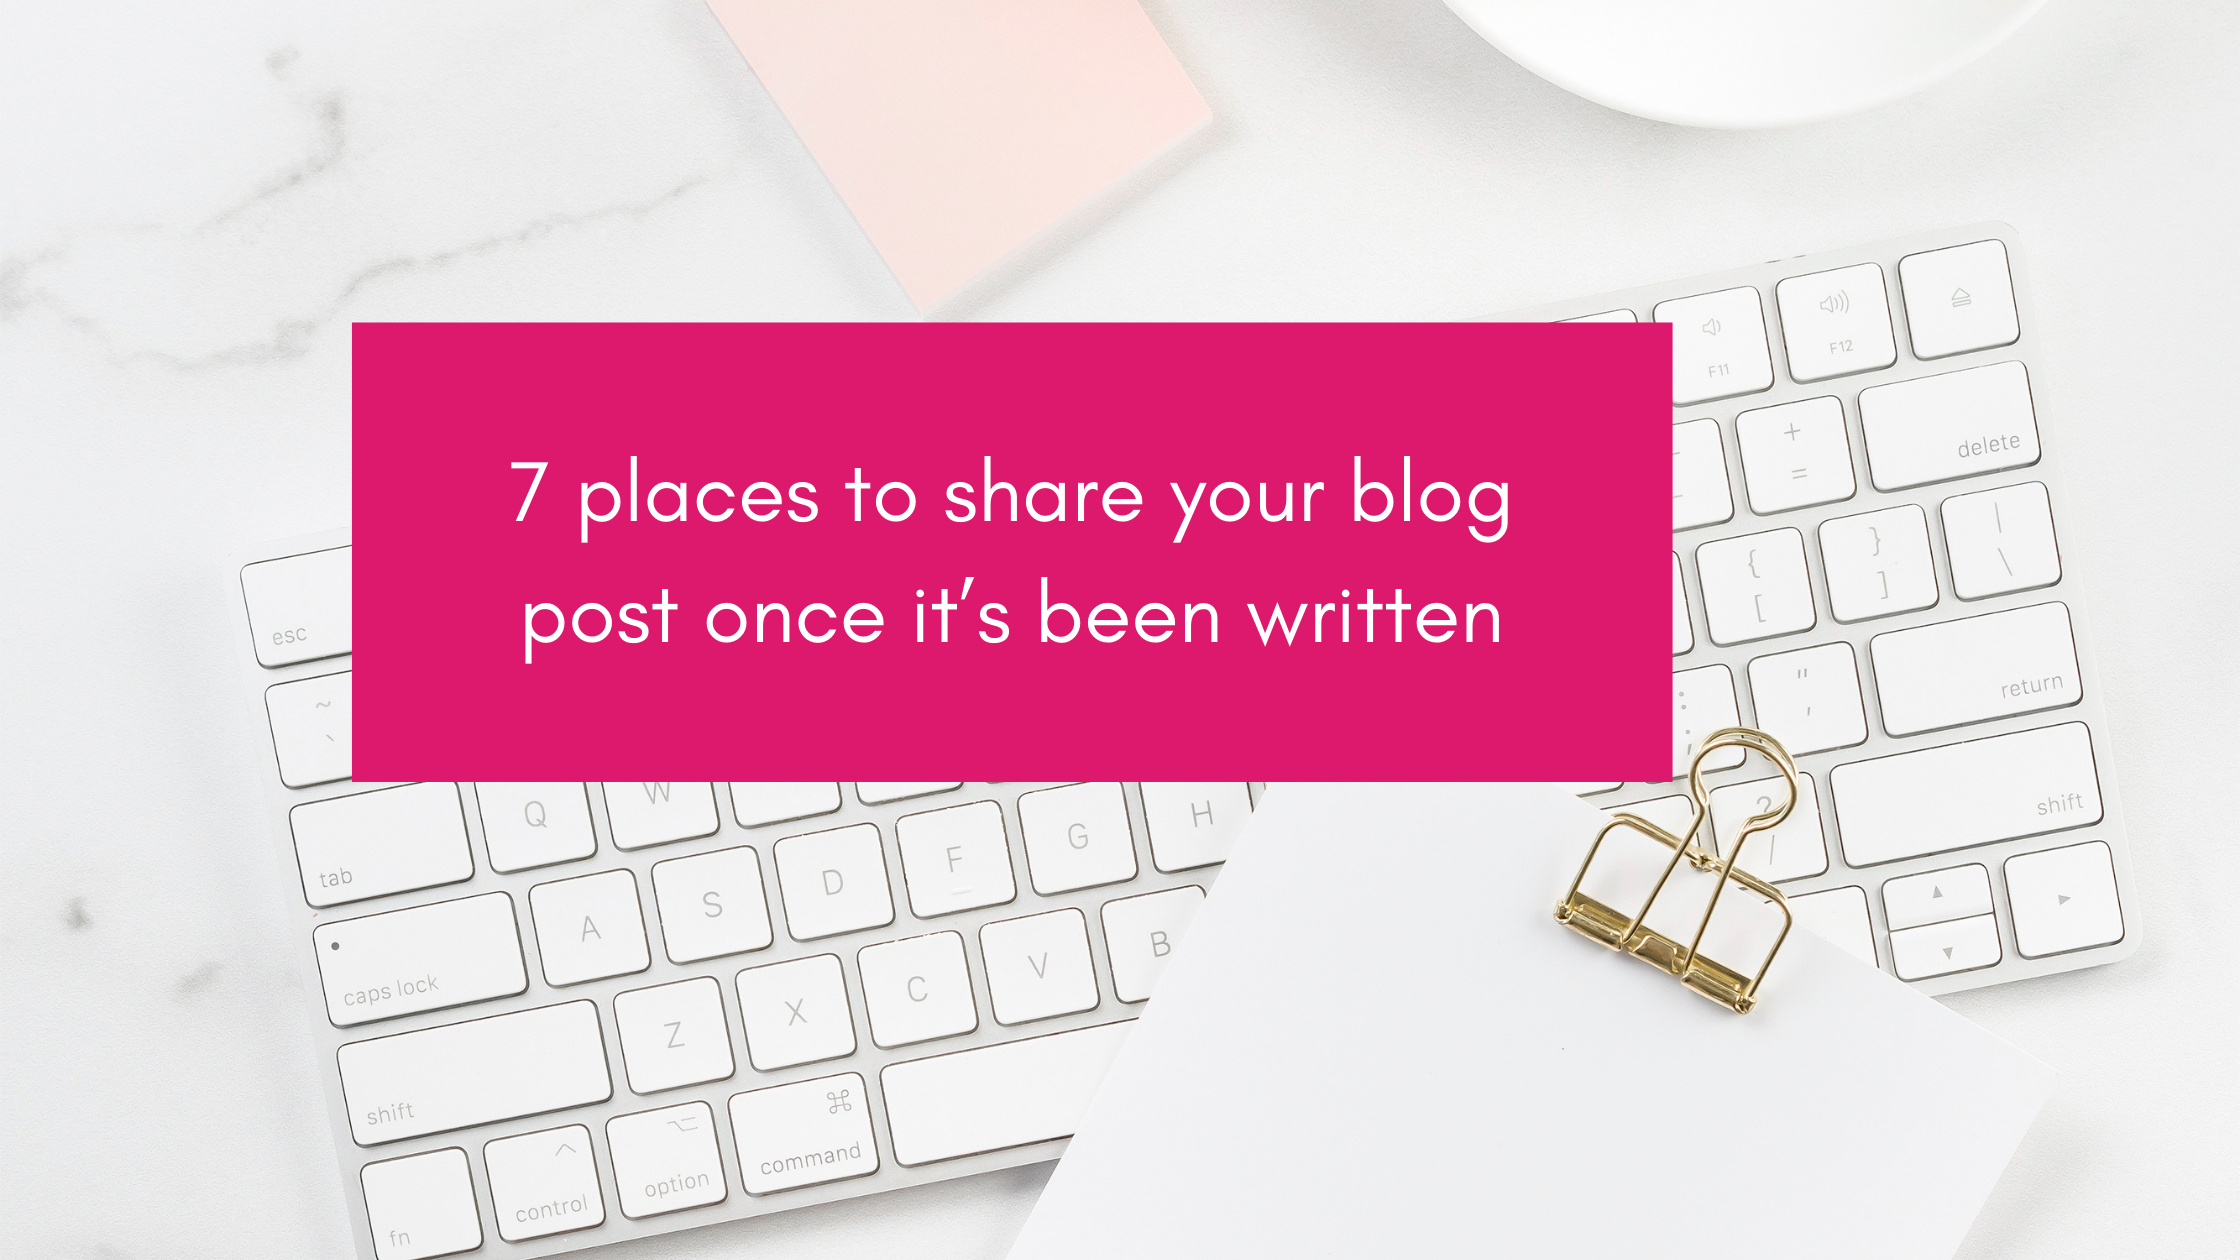 7 places to share your blog post once it’s been written